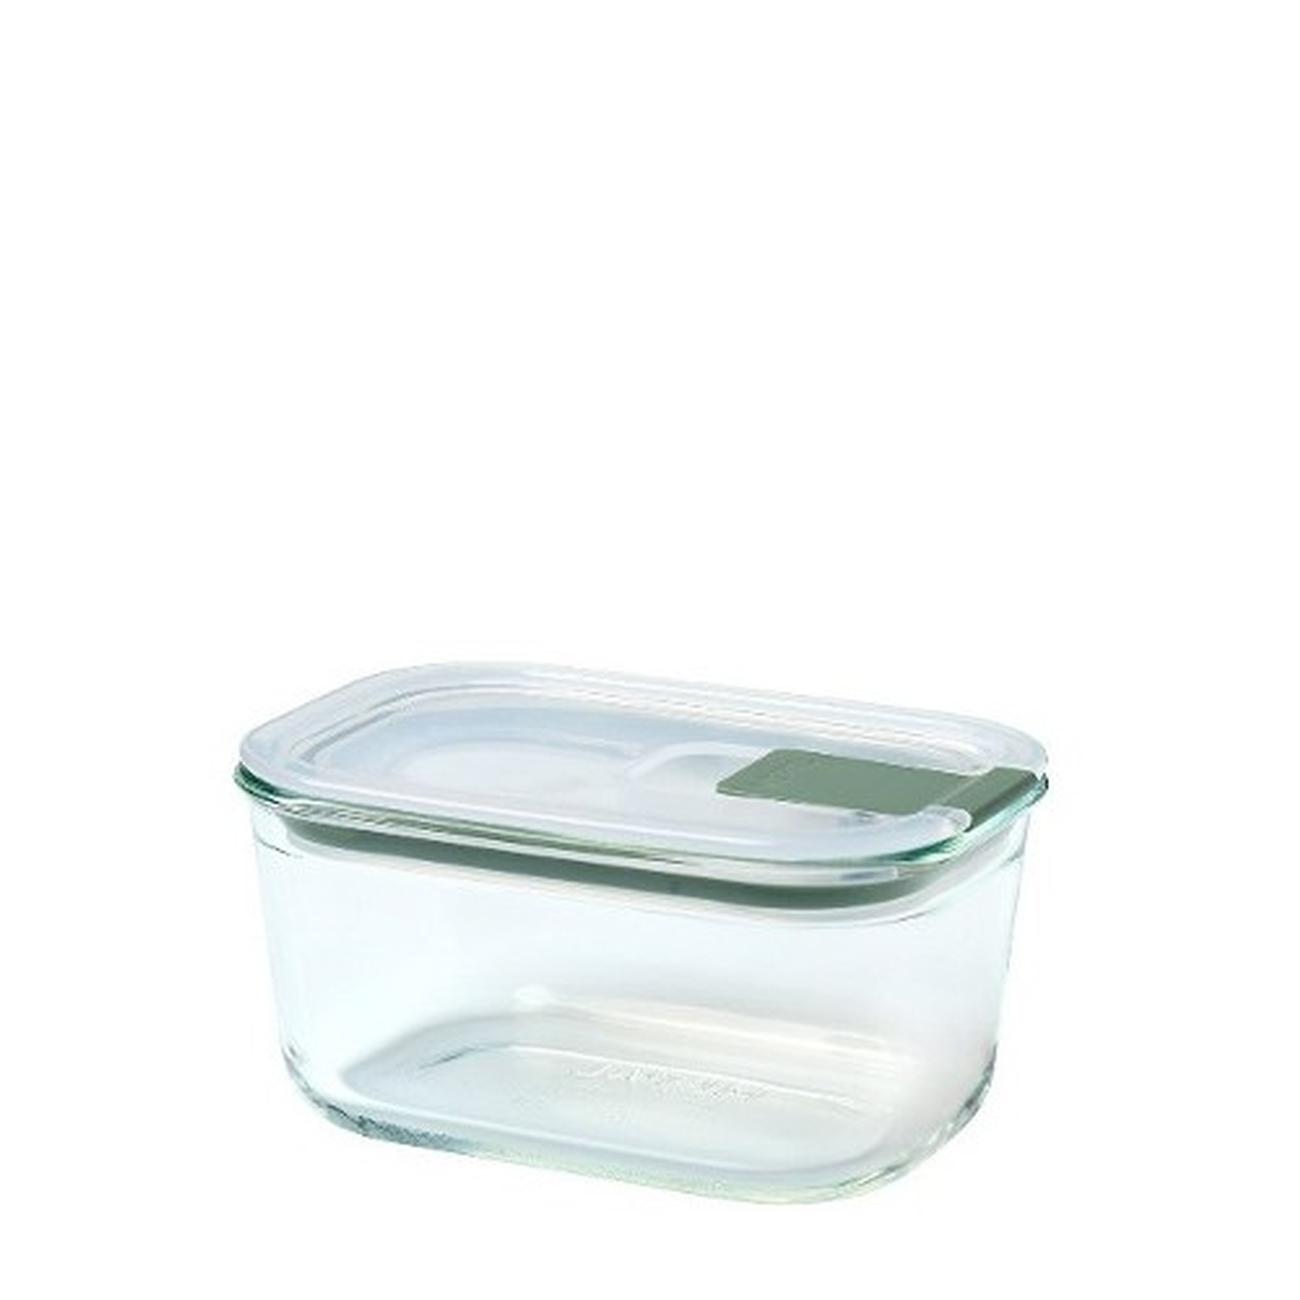 https://www.thekitchenwhisk.ie/contentFiles/productImages/Large/1685442761088_mepal-easy-clip-glass-food-storage-box-nordic-sage.jpg